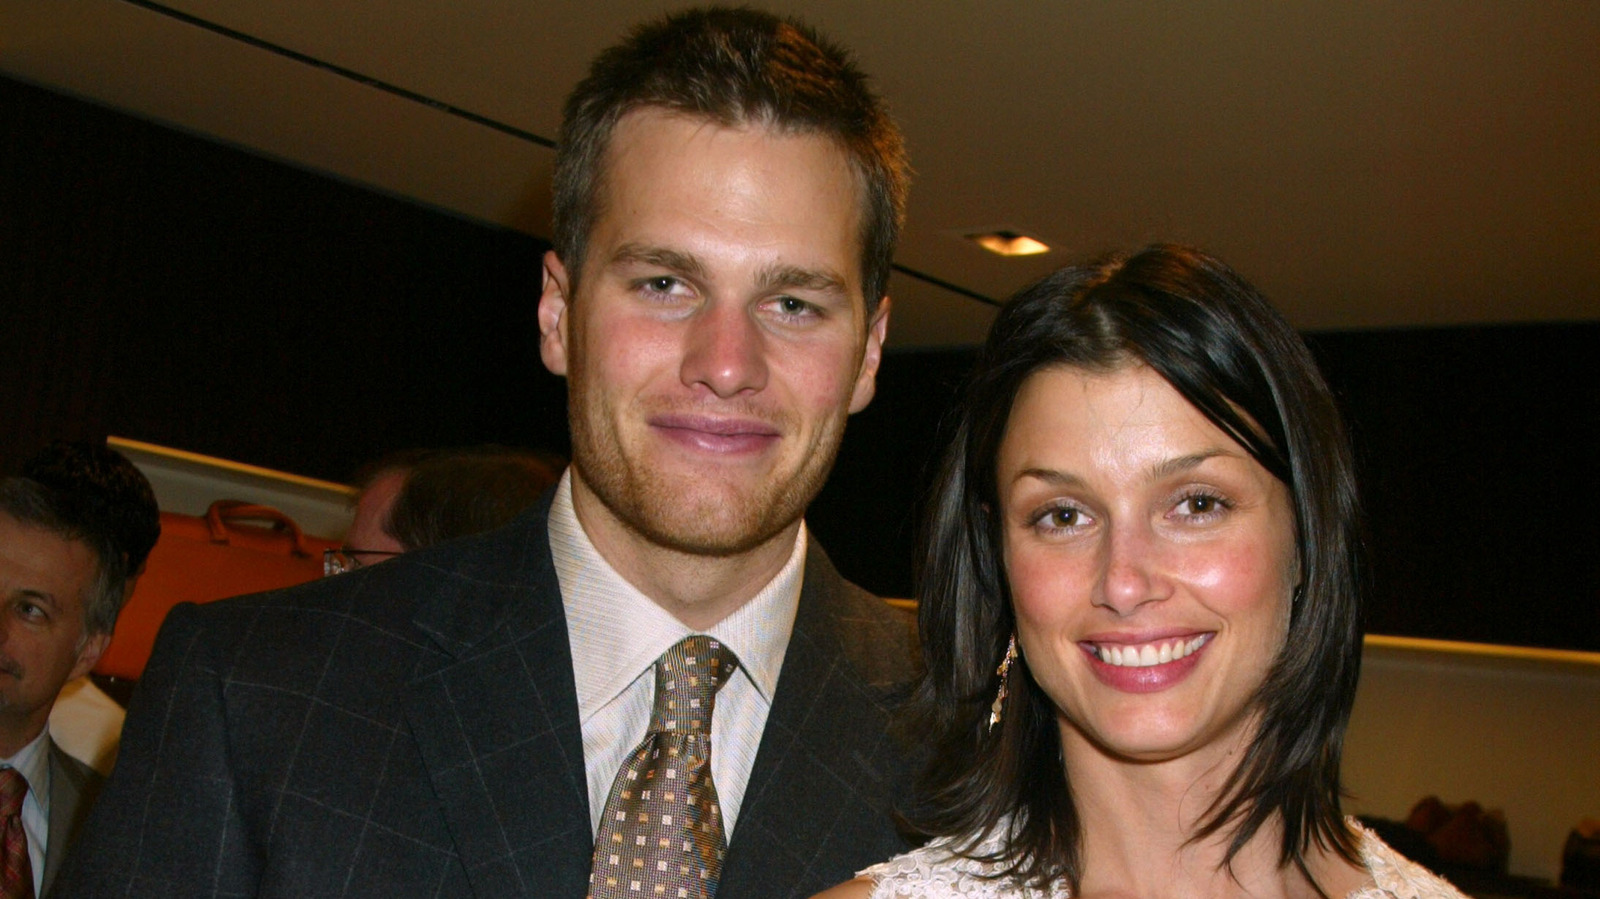 How Bridget Moynahan's Life Changed After Dating Tom Brady